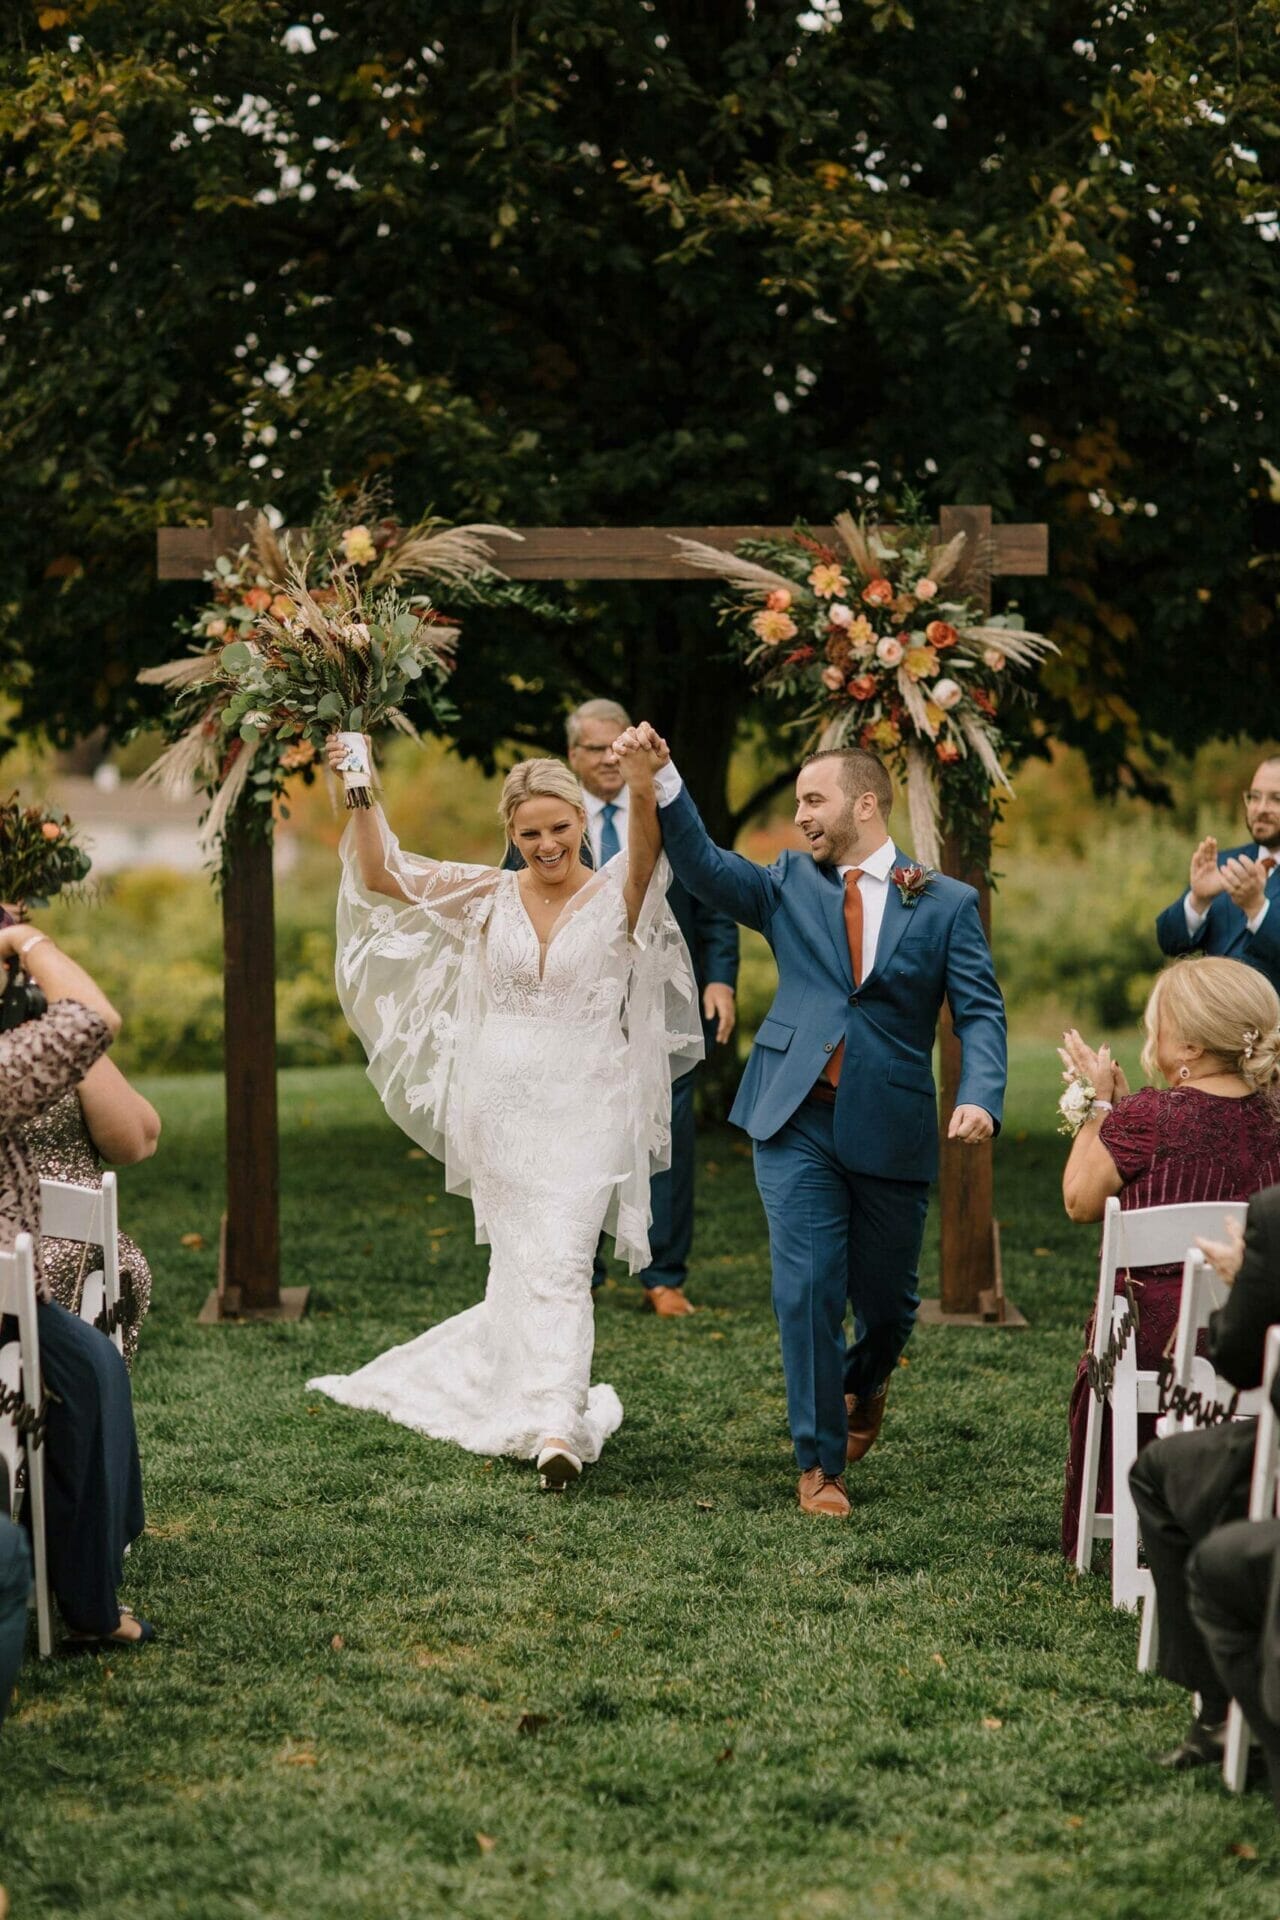 A bride and groom walking down the aisle at a fall wedding, beautifully attired in their exquisite wedding dresses from a renowned bridal salon.